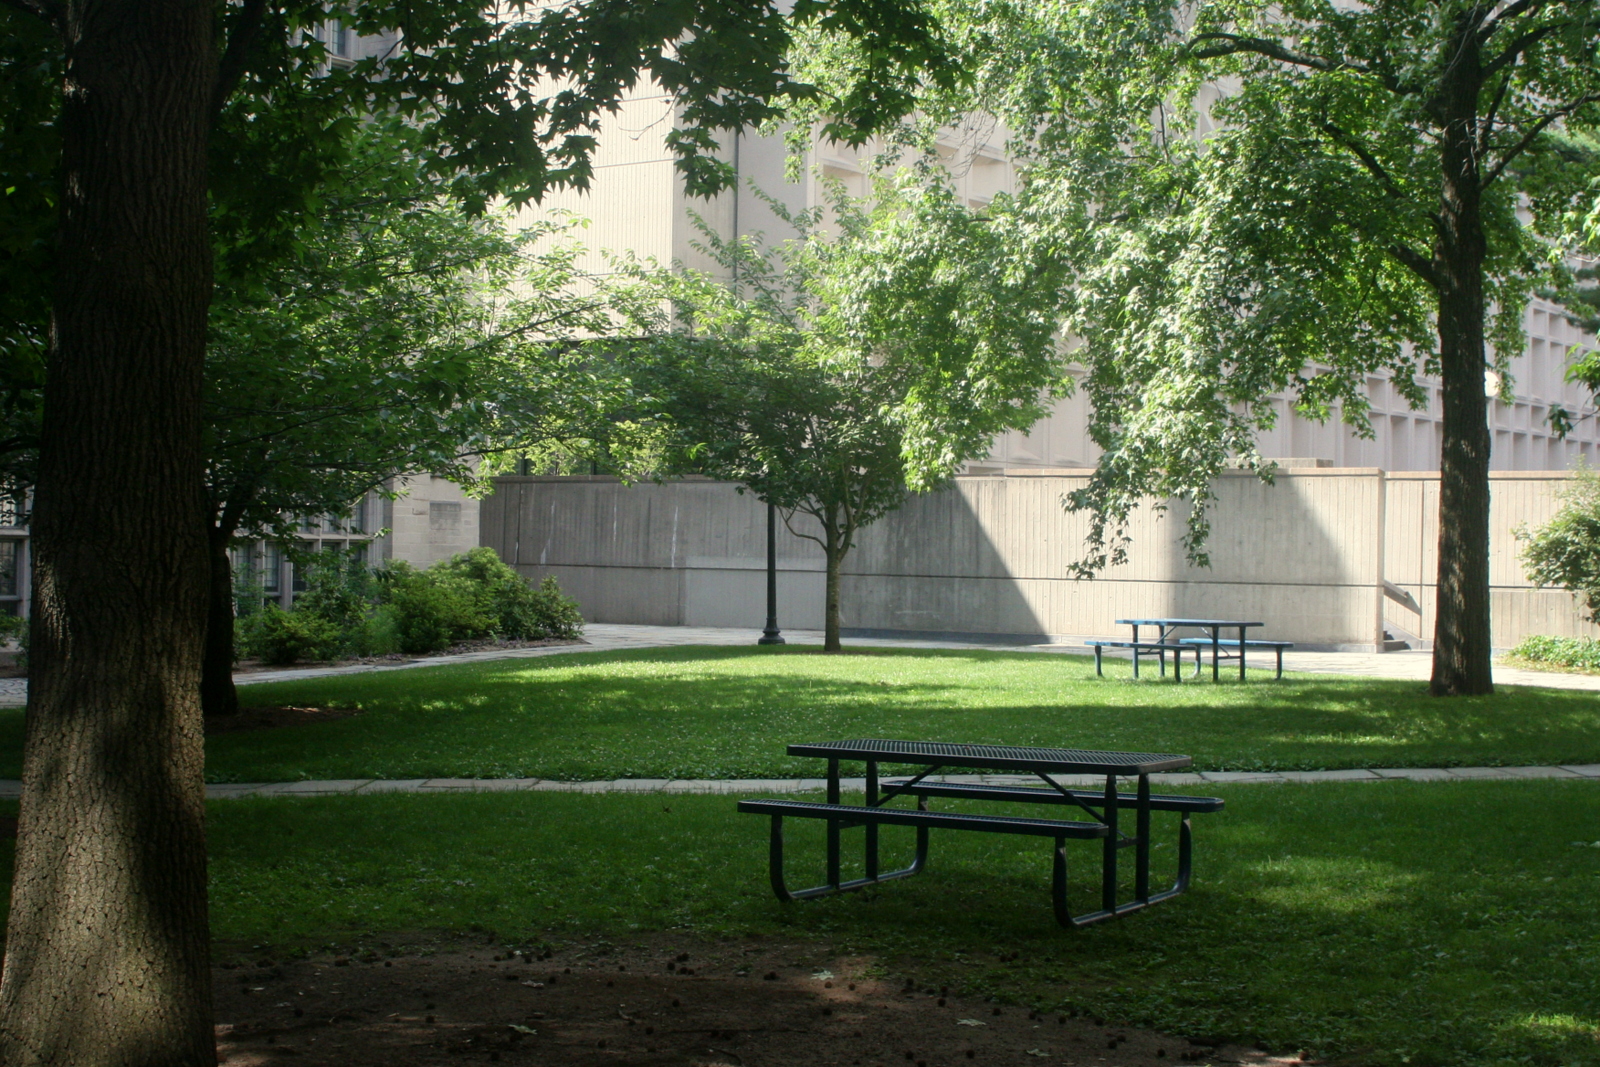 The courtyard outside the lab. Picnic spot!?